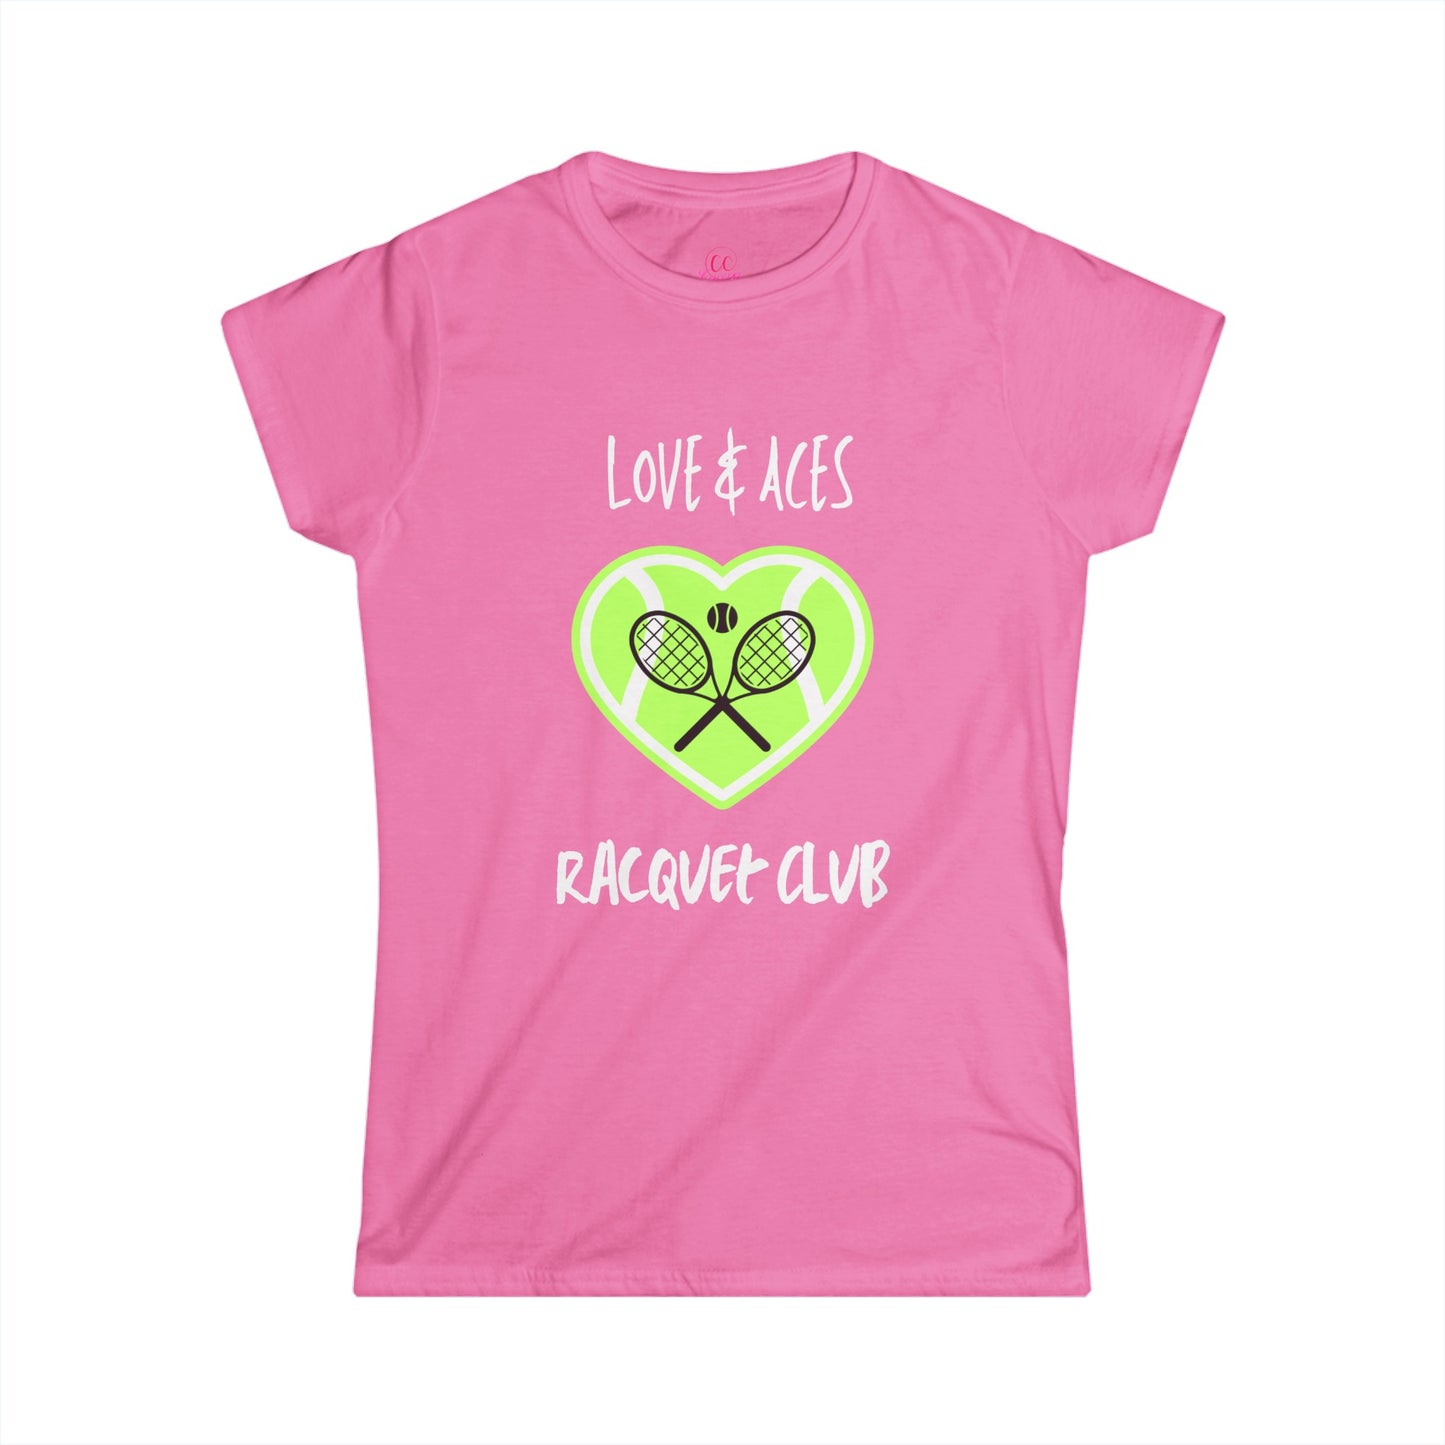 Love & Aces Tennis Club Women's Short Sleeve Softstyle T-Shirt Sizes S-2xl